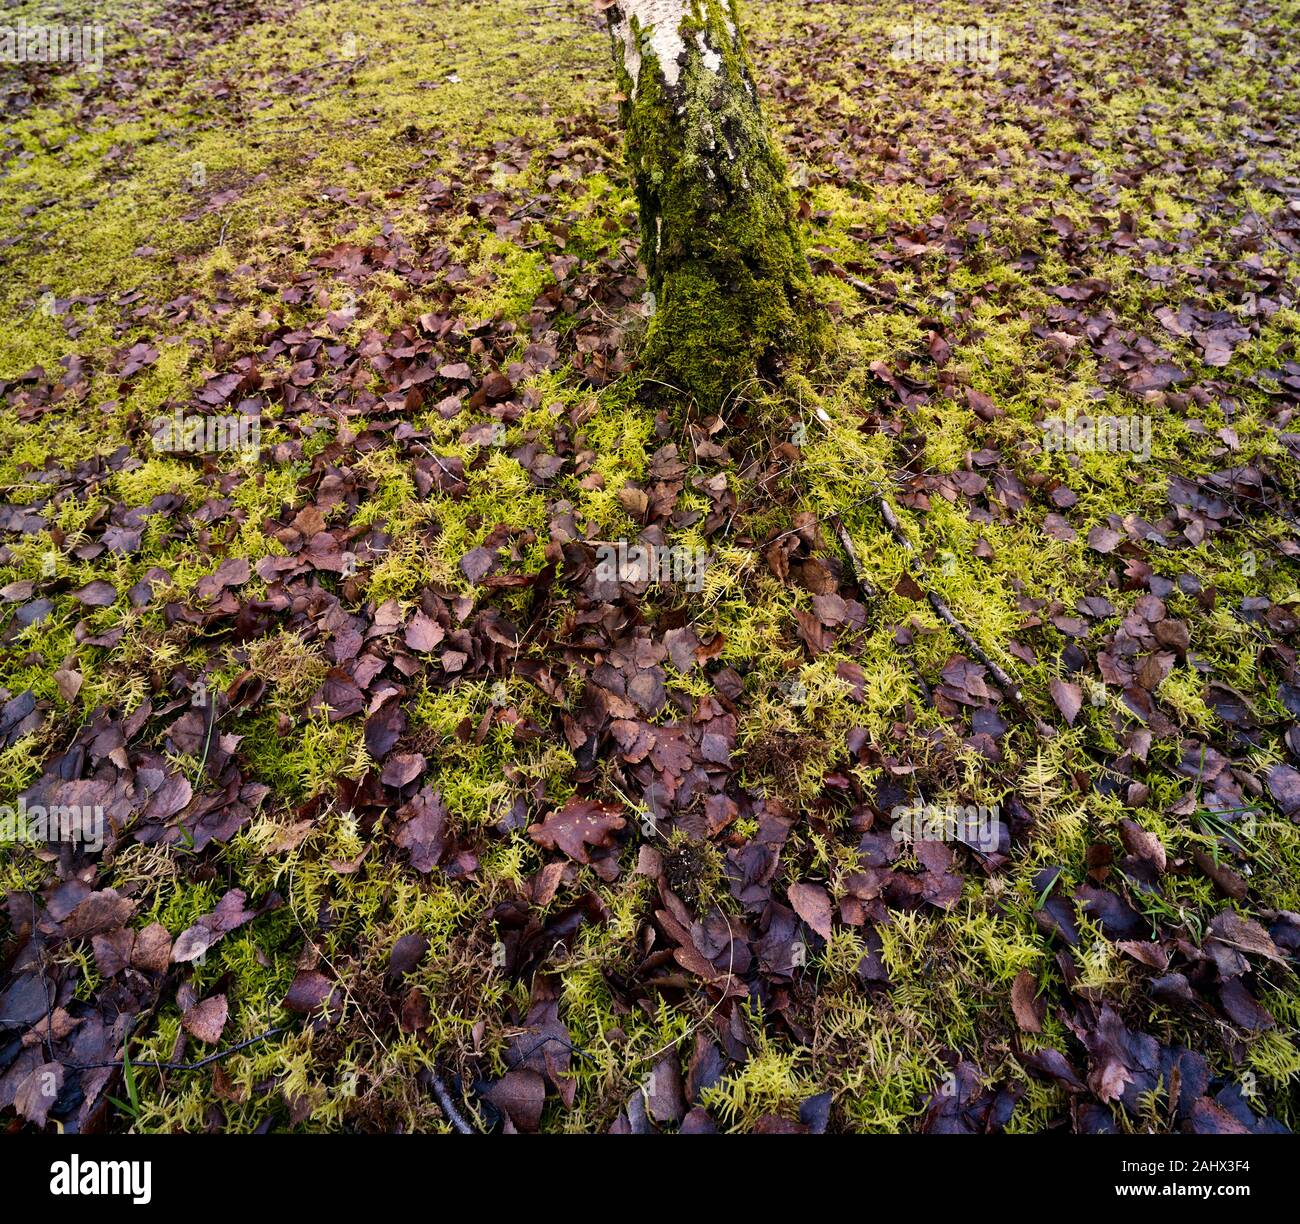 Colourful Mosses In A Damp Area Of Beacon Wood Country Park Kent England United Kingdom Europe Stock Photo Alamy